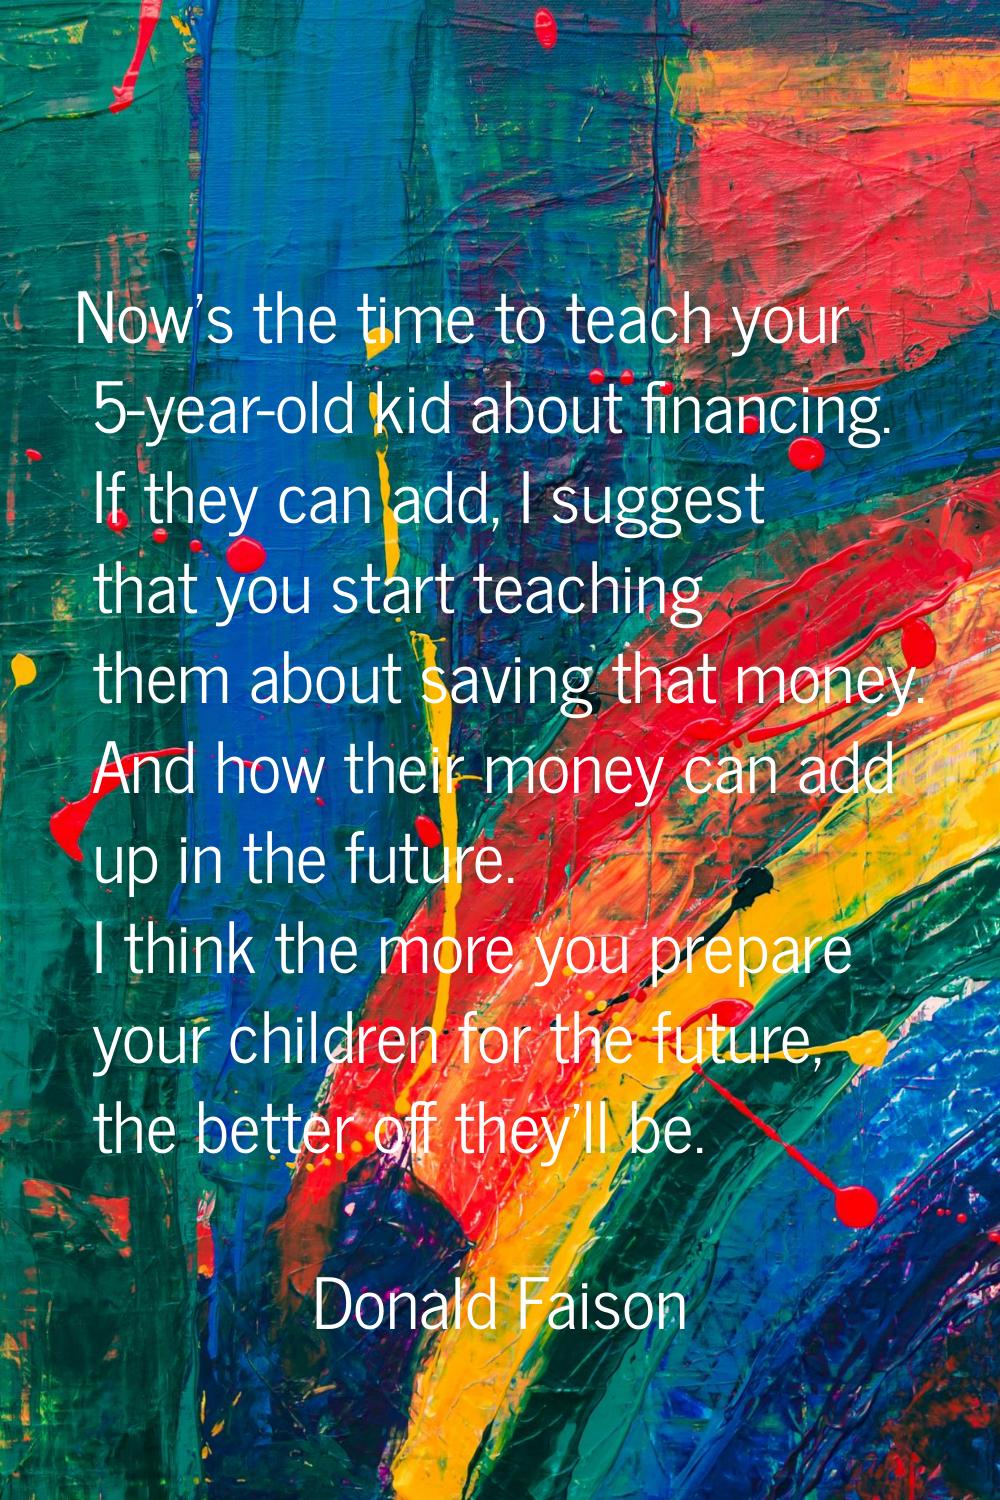 Now's the time to teach your 5-year-old kid about financing. If they can add, I suggest that you st